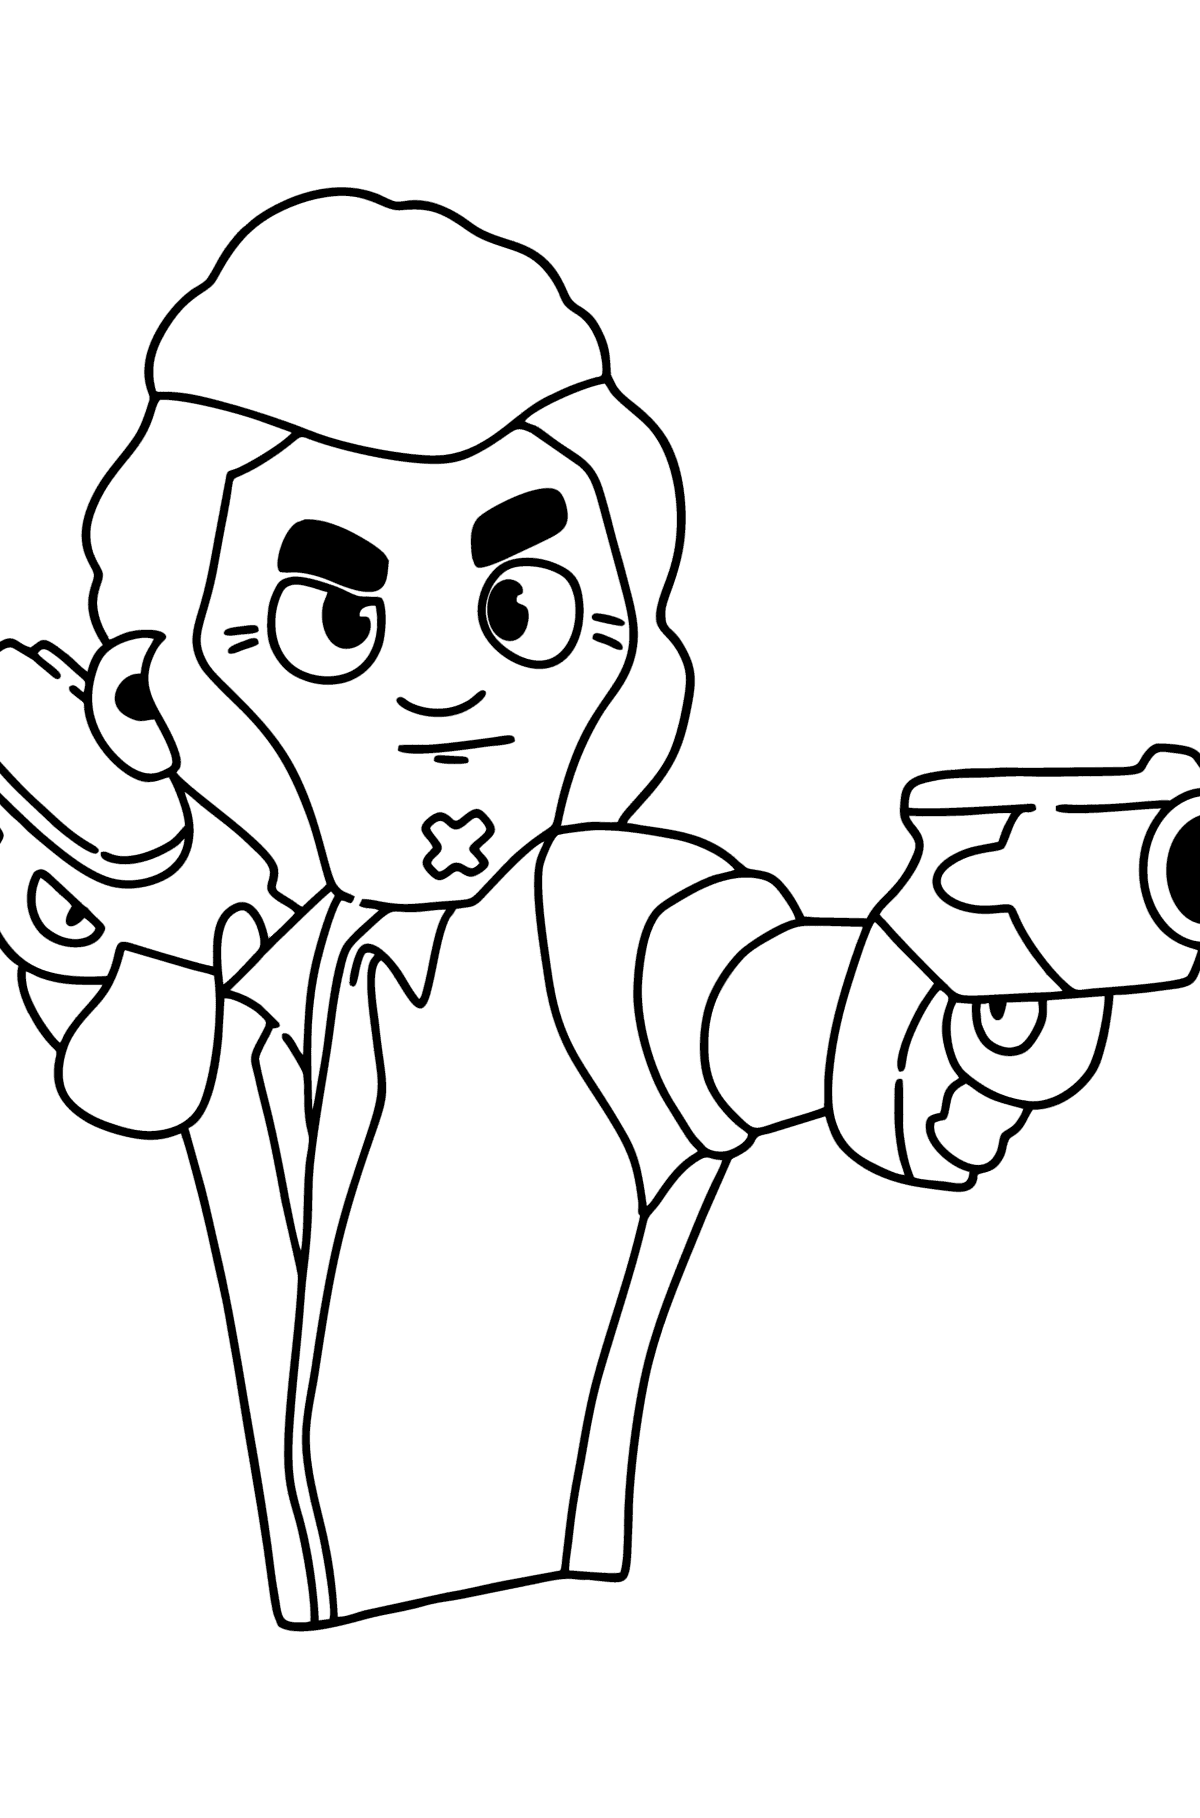 Brawl Stars Сolt coloring page - Coloring Pages for Kids